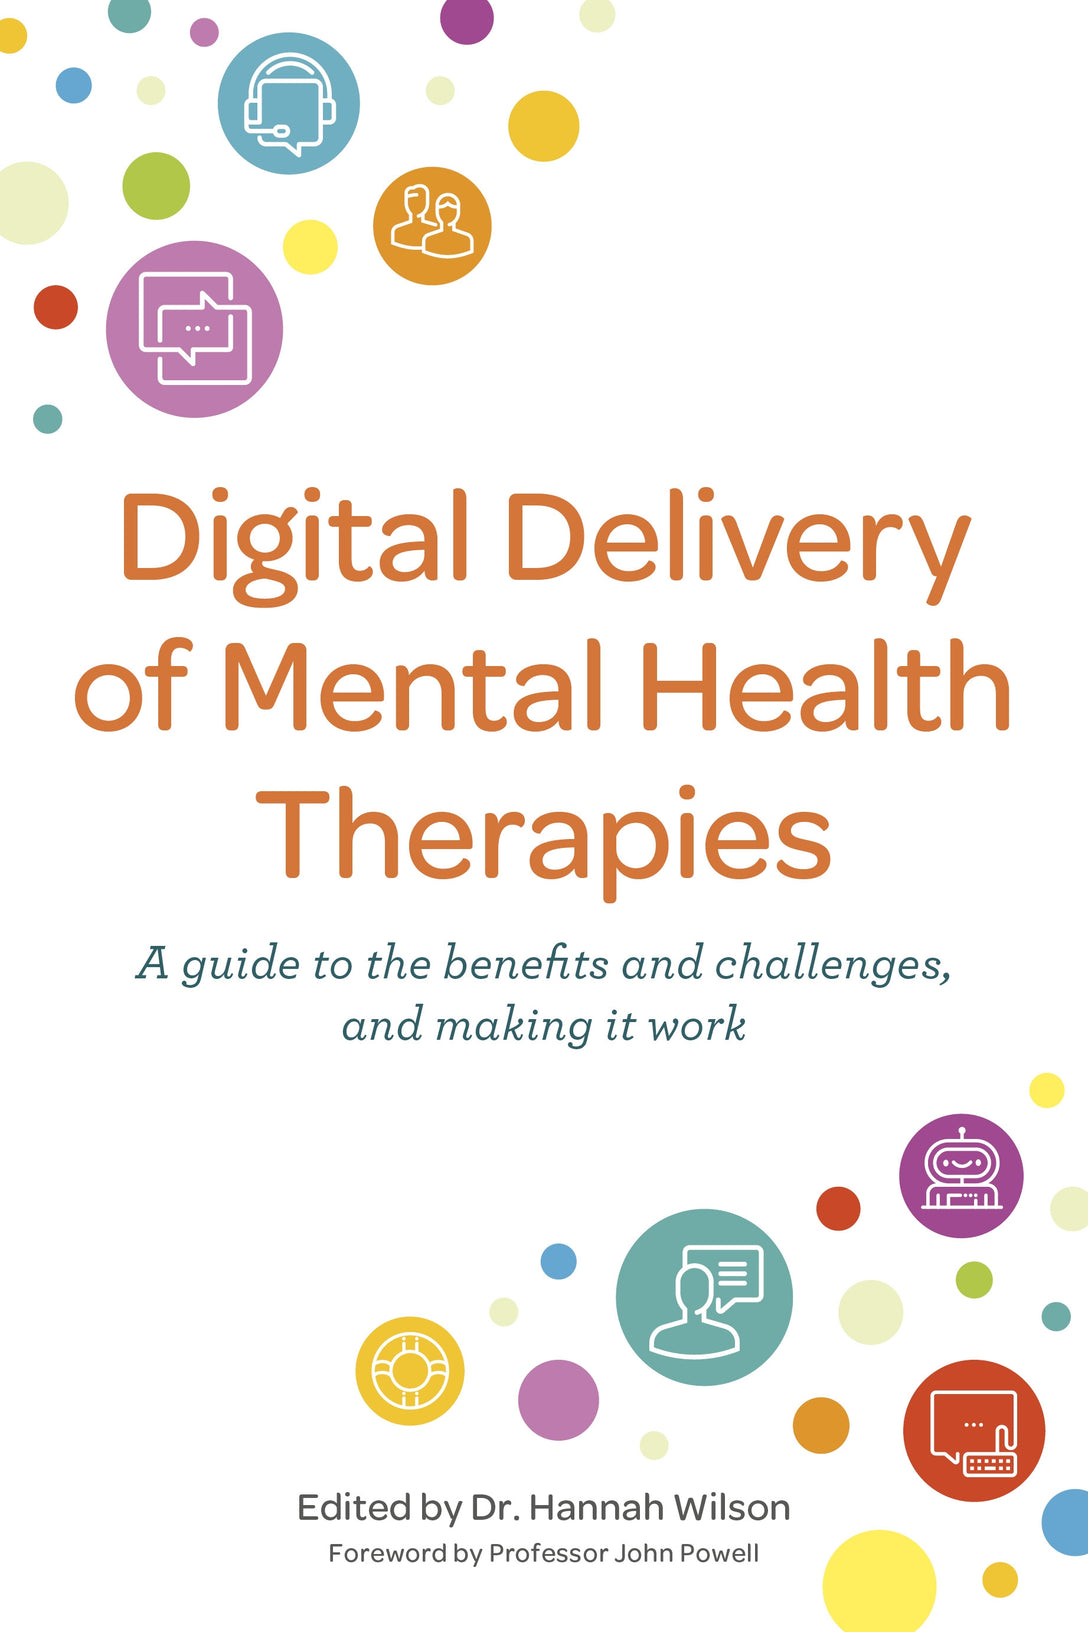 Digital Delivery of Mental Health Therapies by No Author Listed, Hannah Wilson, John Powell